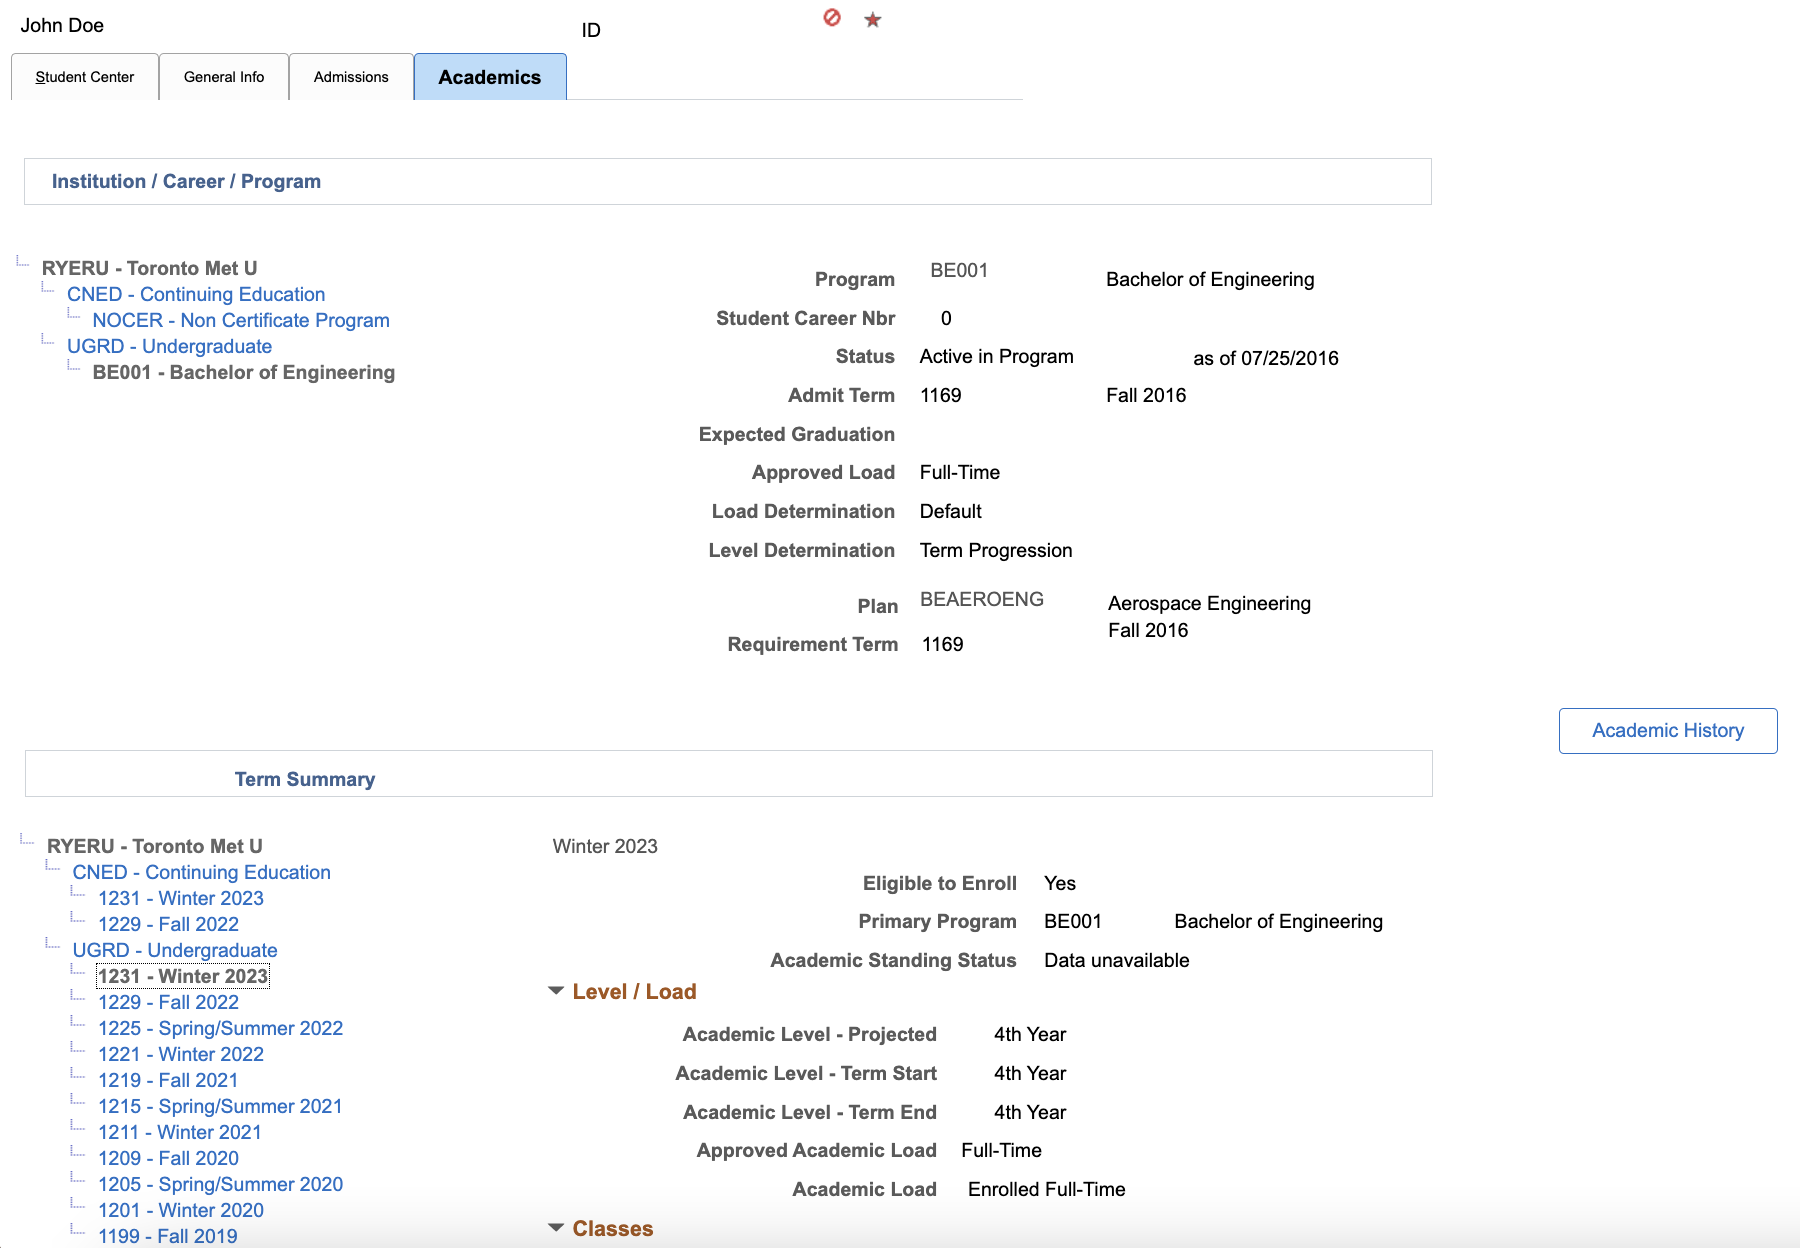 Academics tab within Admin Center includes sections for Institution/Career/Program and Term Summary.